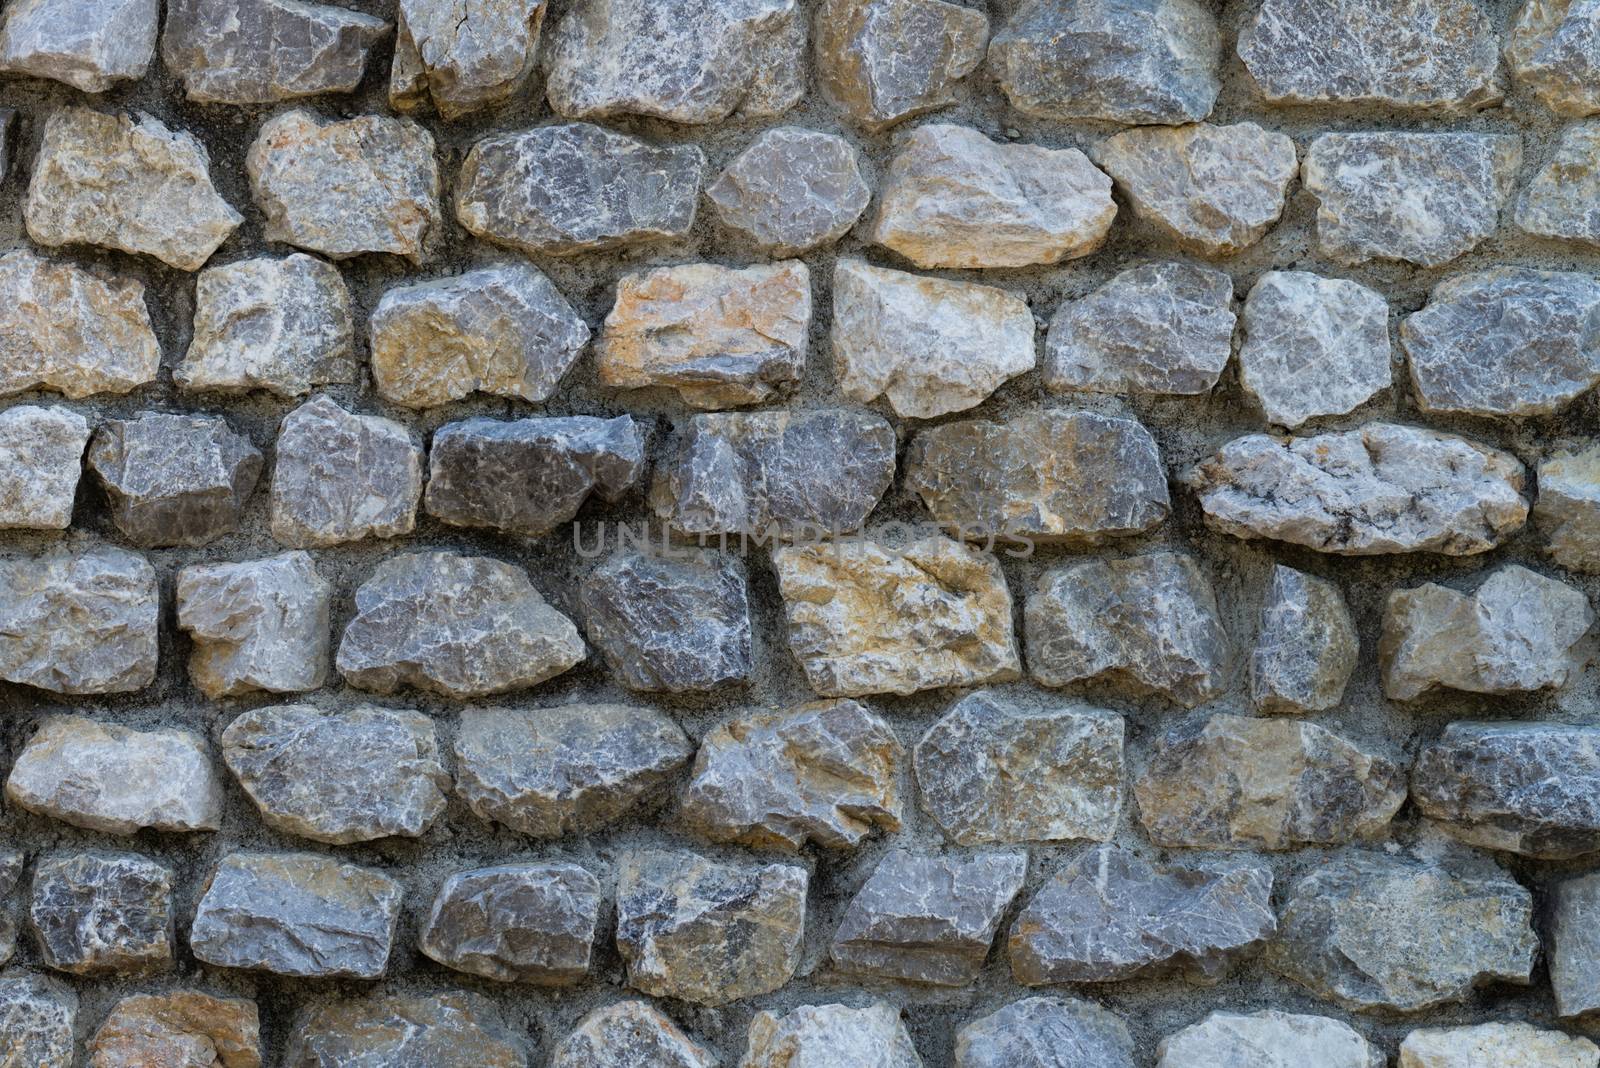 A wall made from many small square stones.